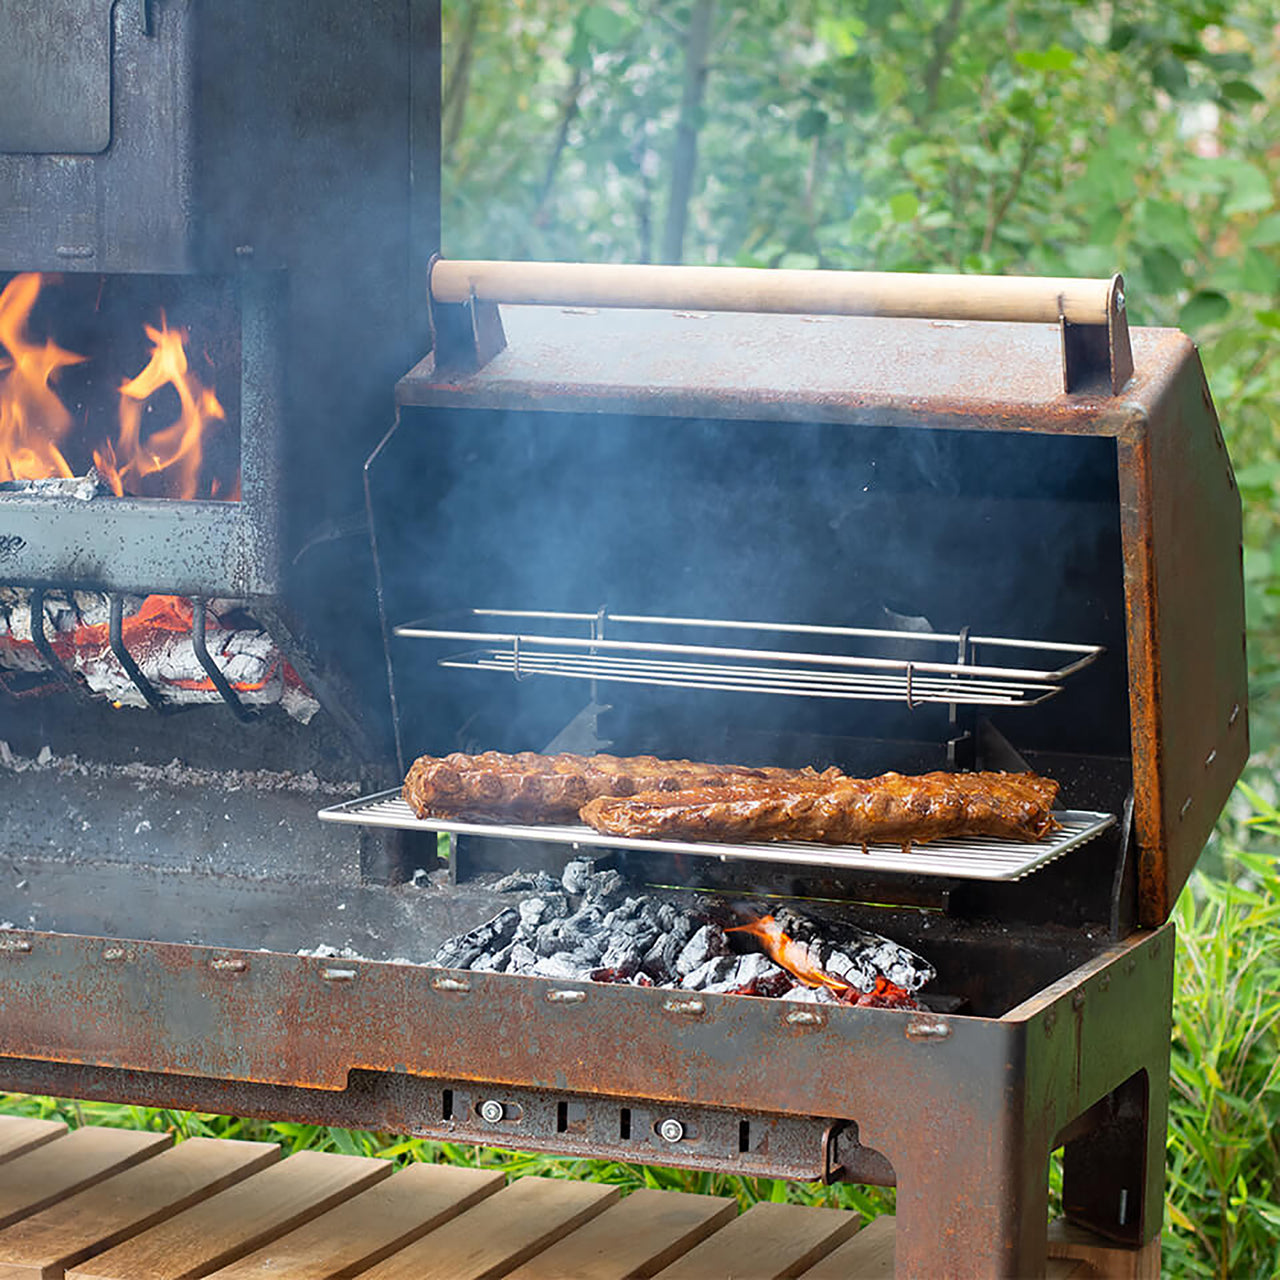 Outdooroven: Accessories  Buy Weltevree online at A+R